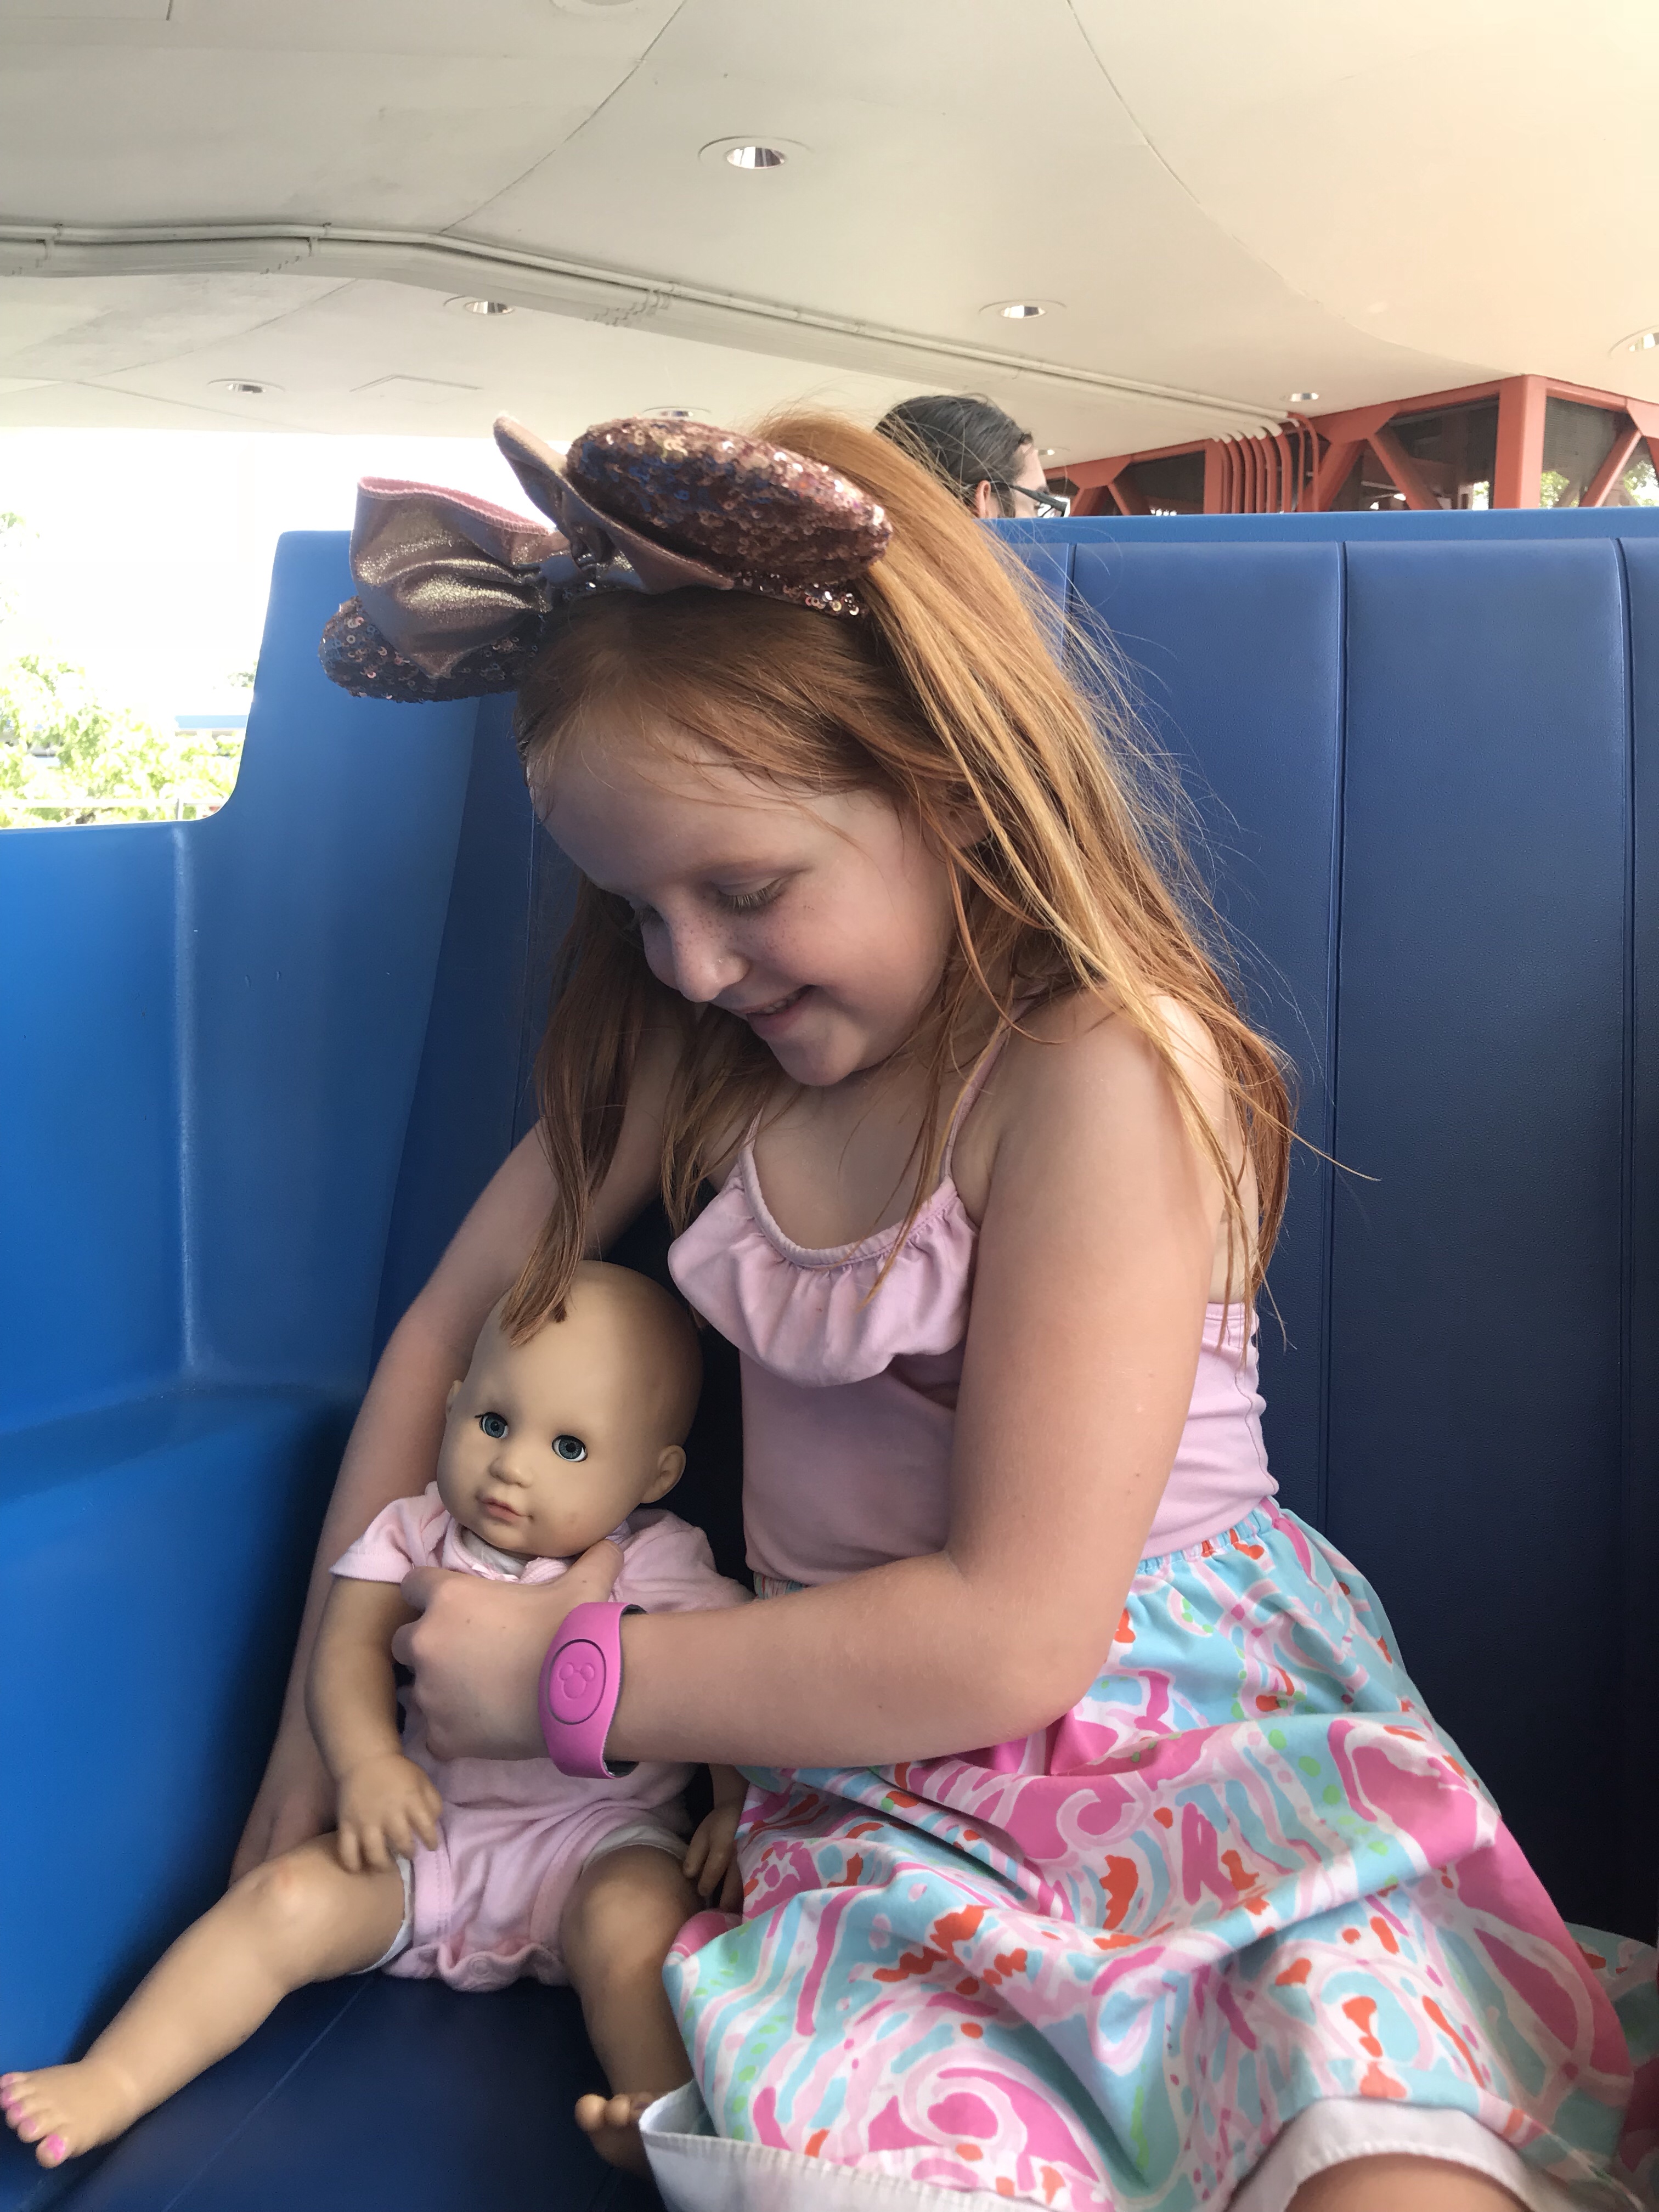 Disney World Summer: Tips to Stay Cool